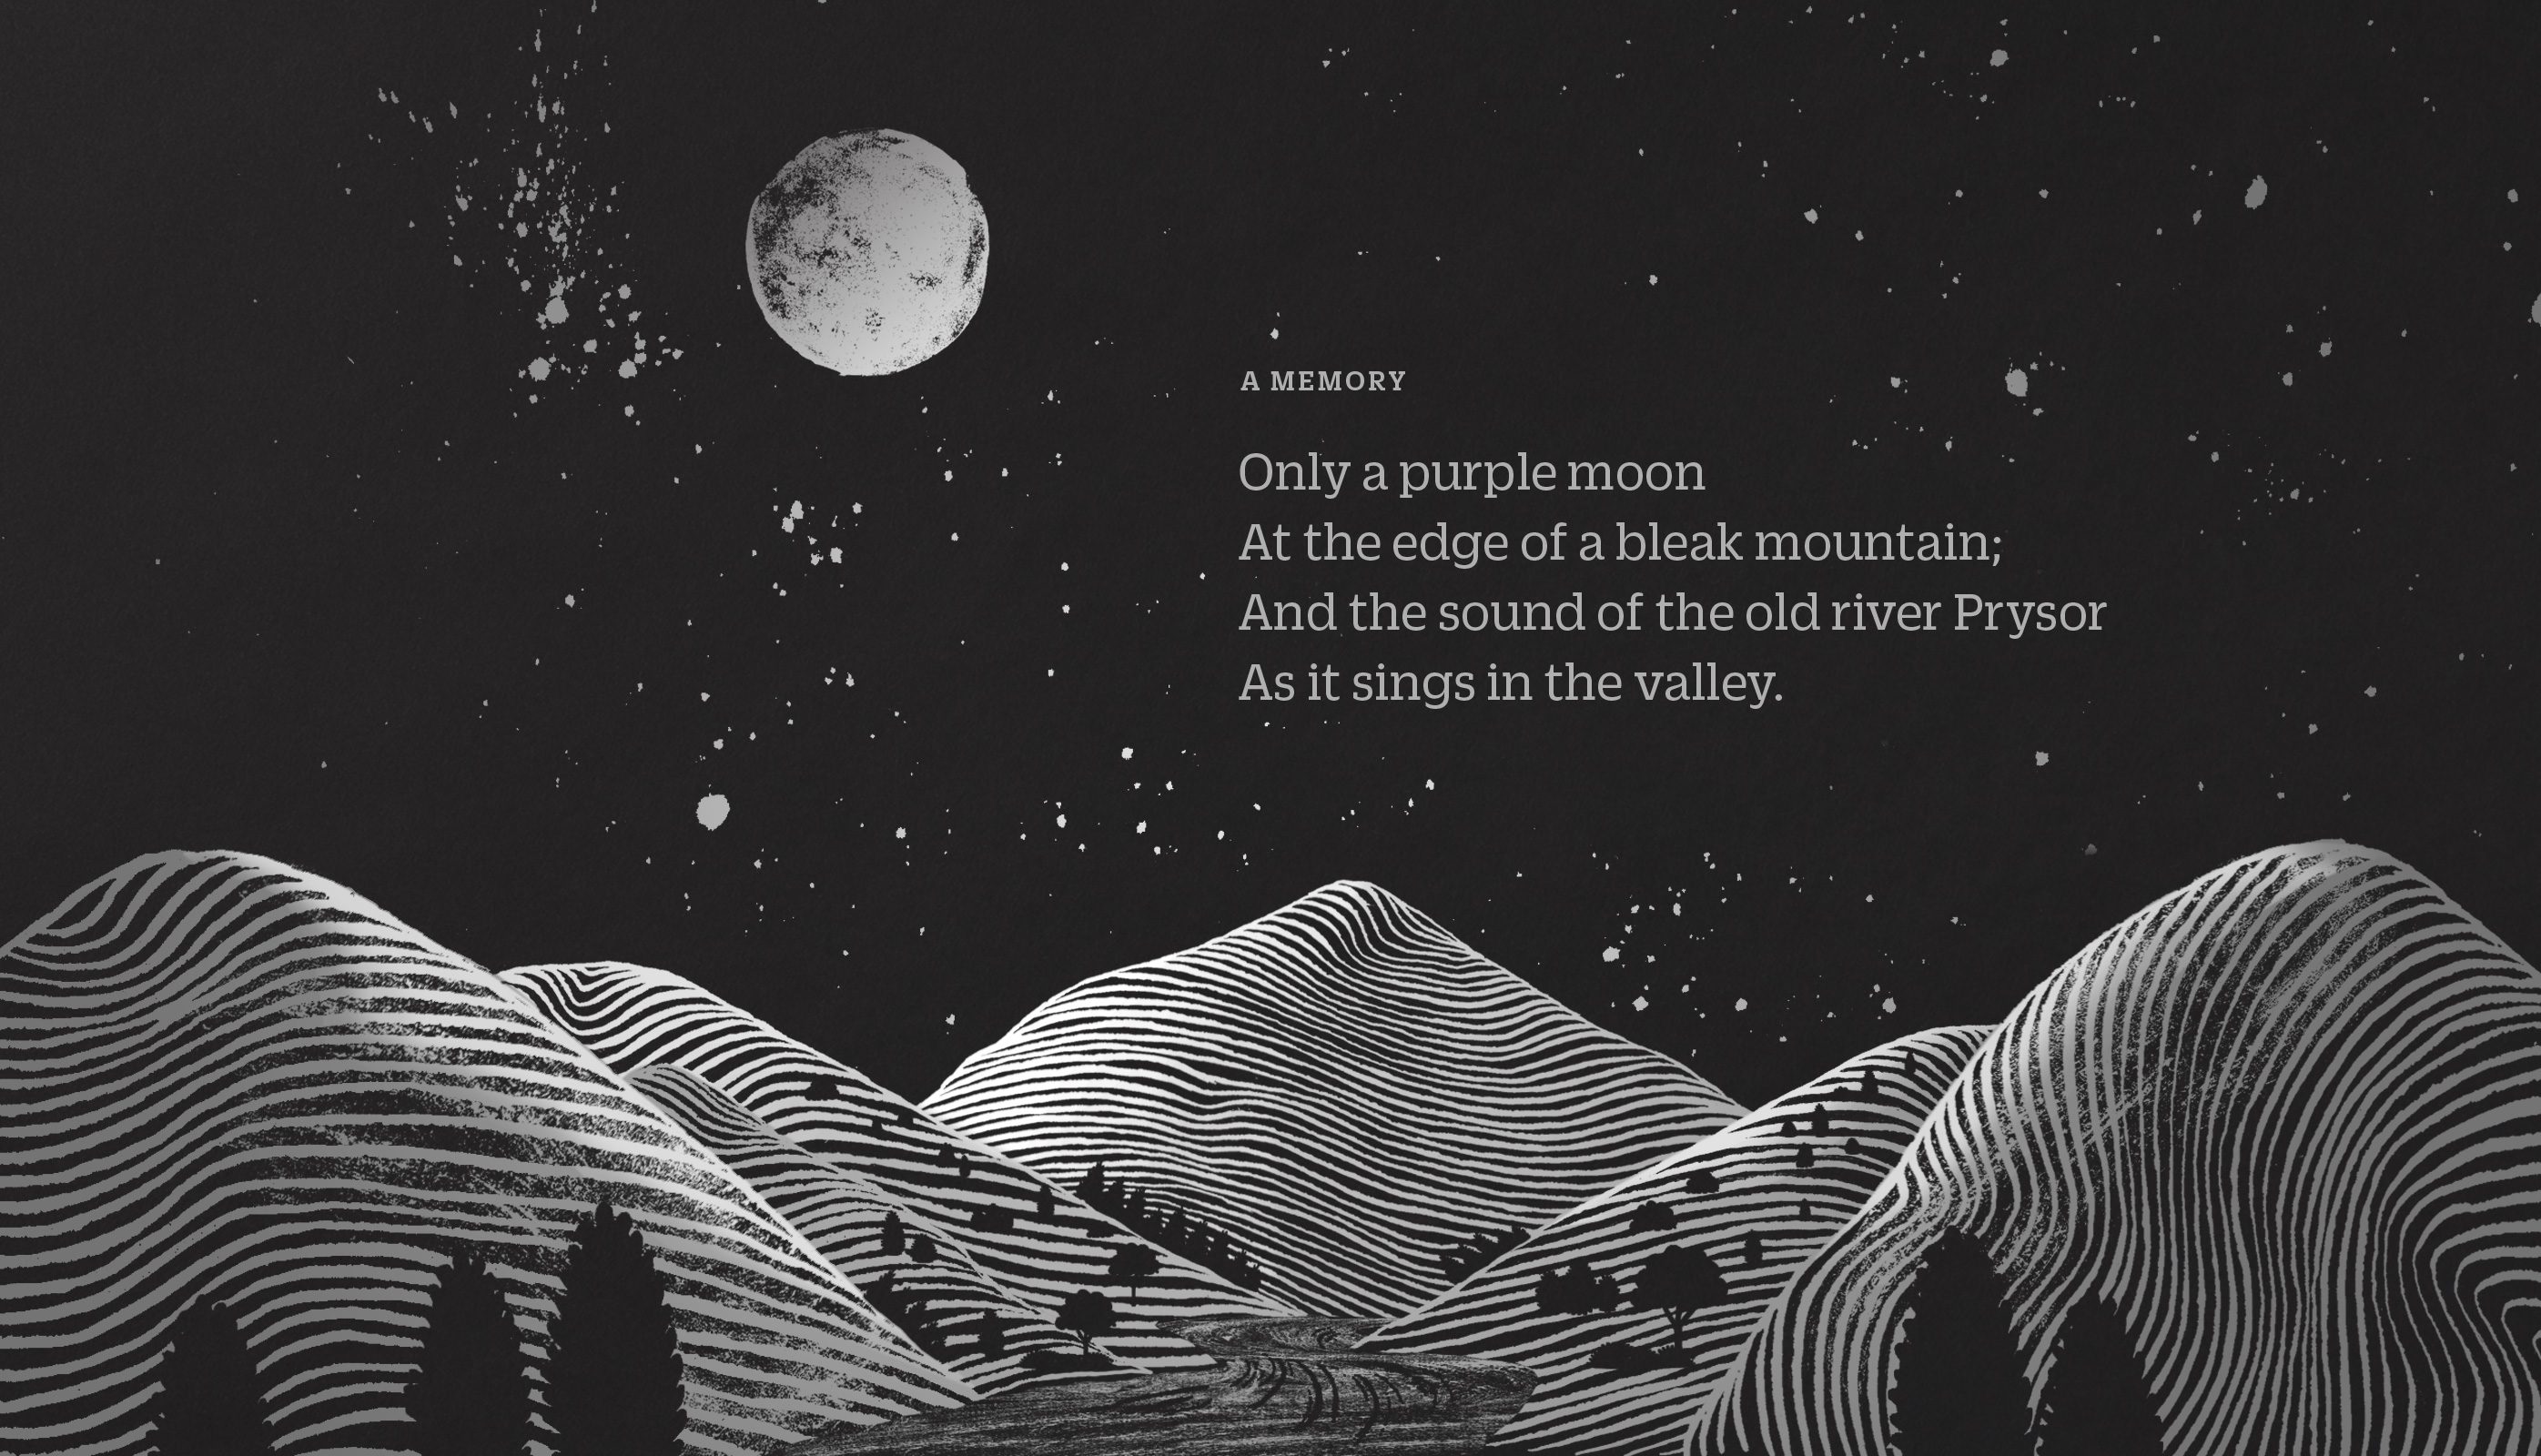 Contemporary illustration of a mountain valley and silvery moon with poem in Welsh language